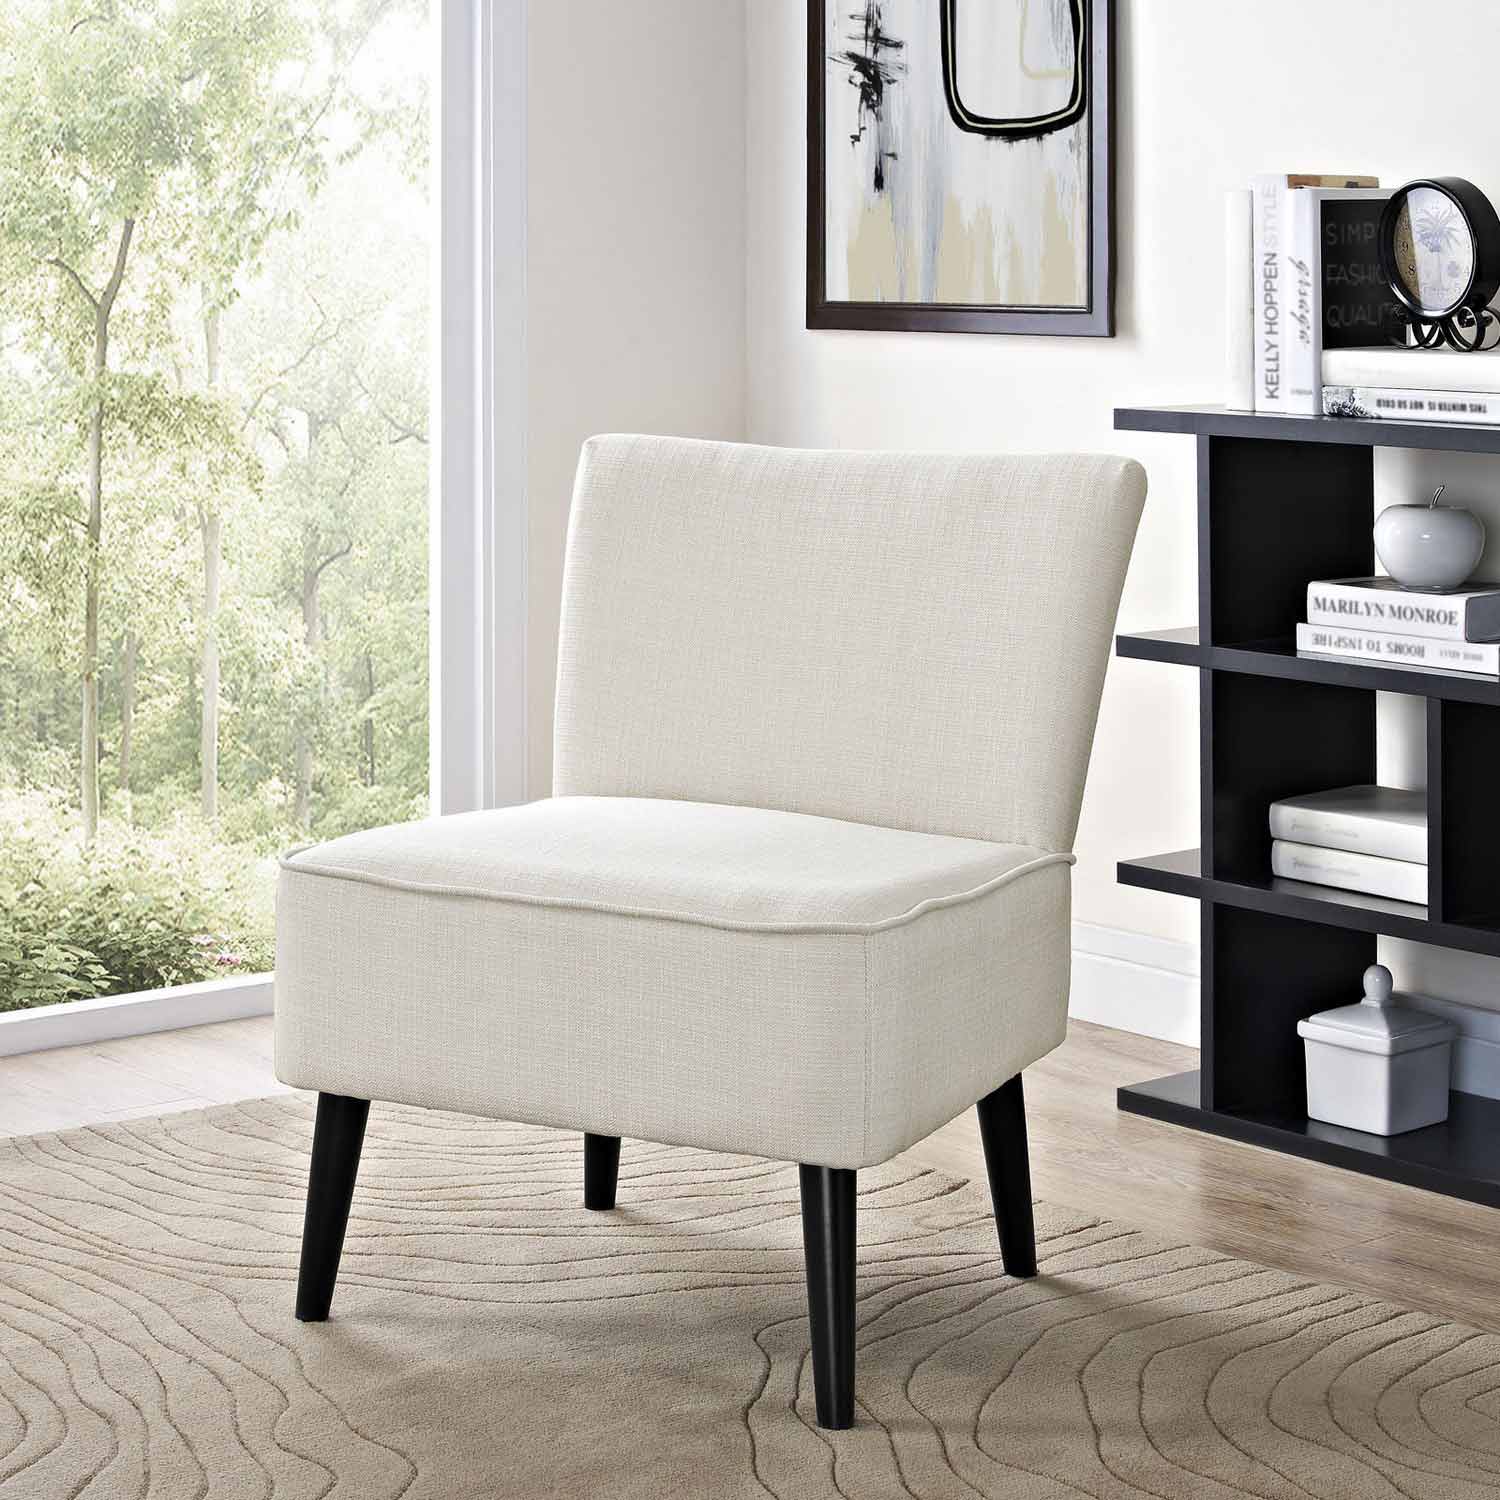 Modway Reef Fabric Side Chair - Beige